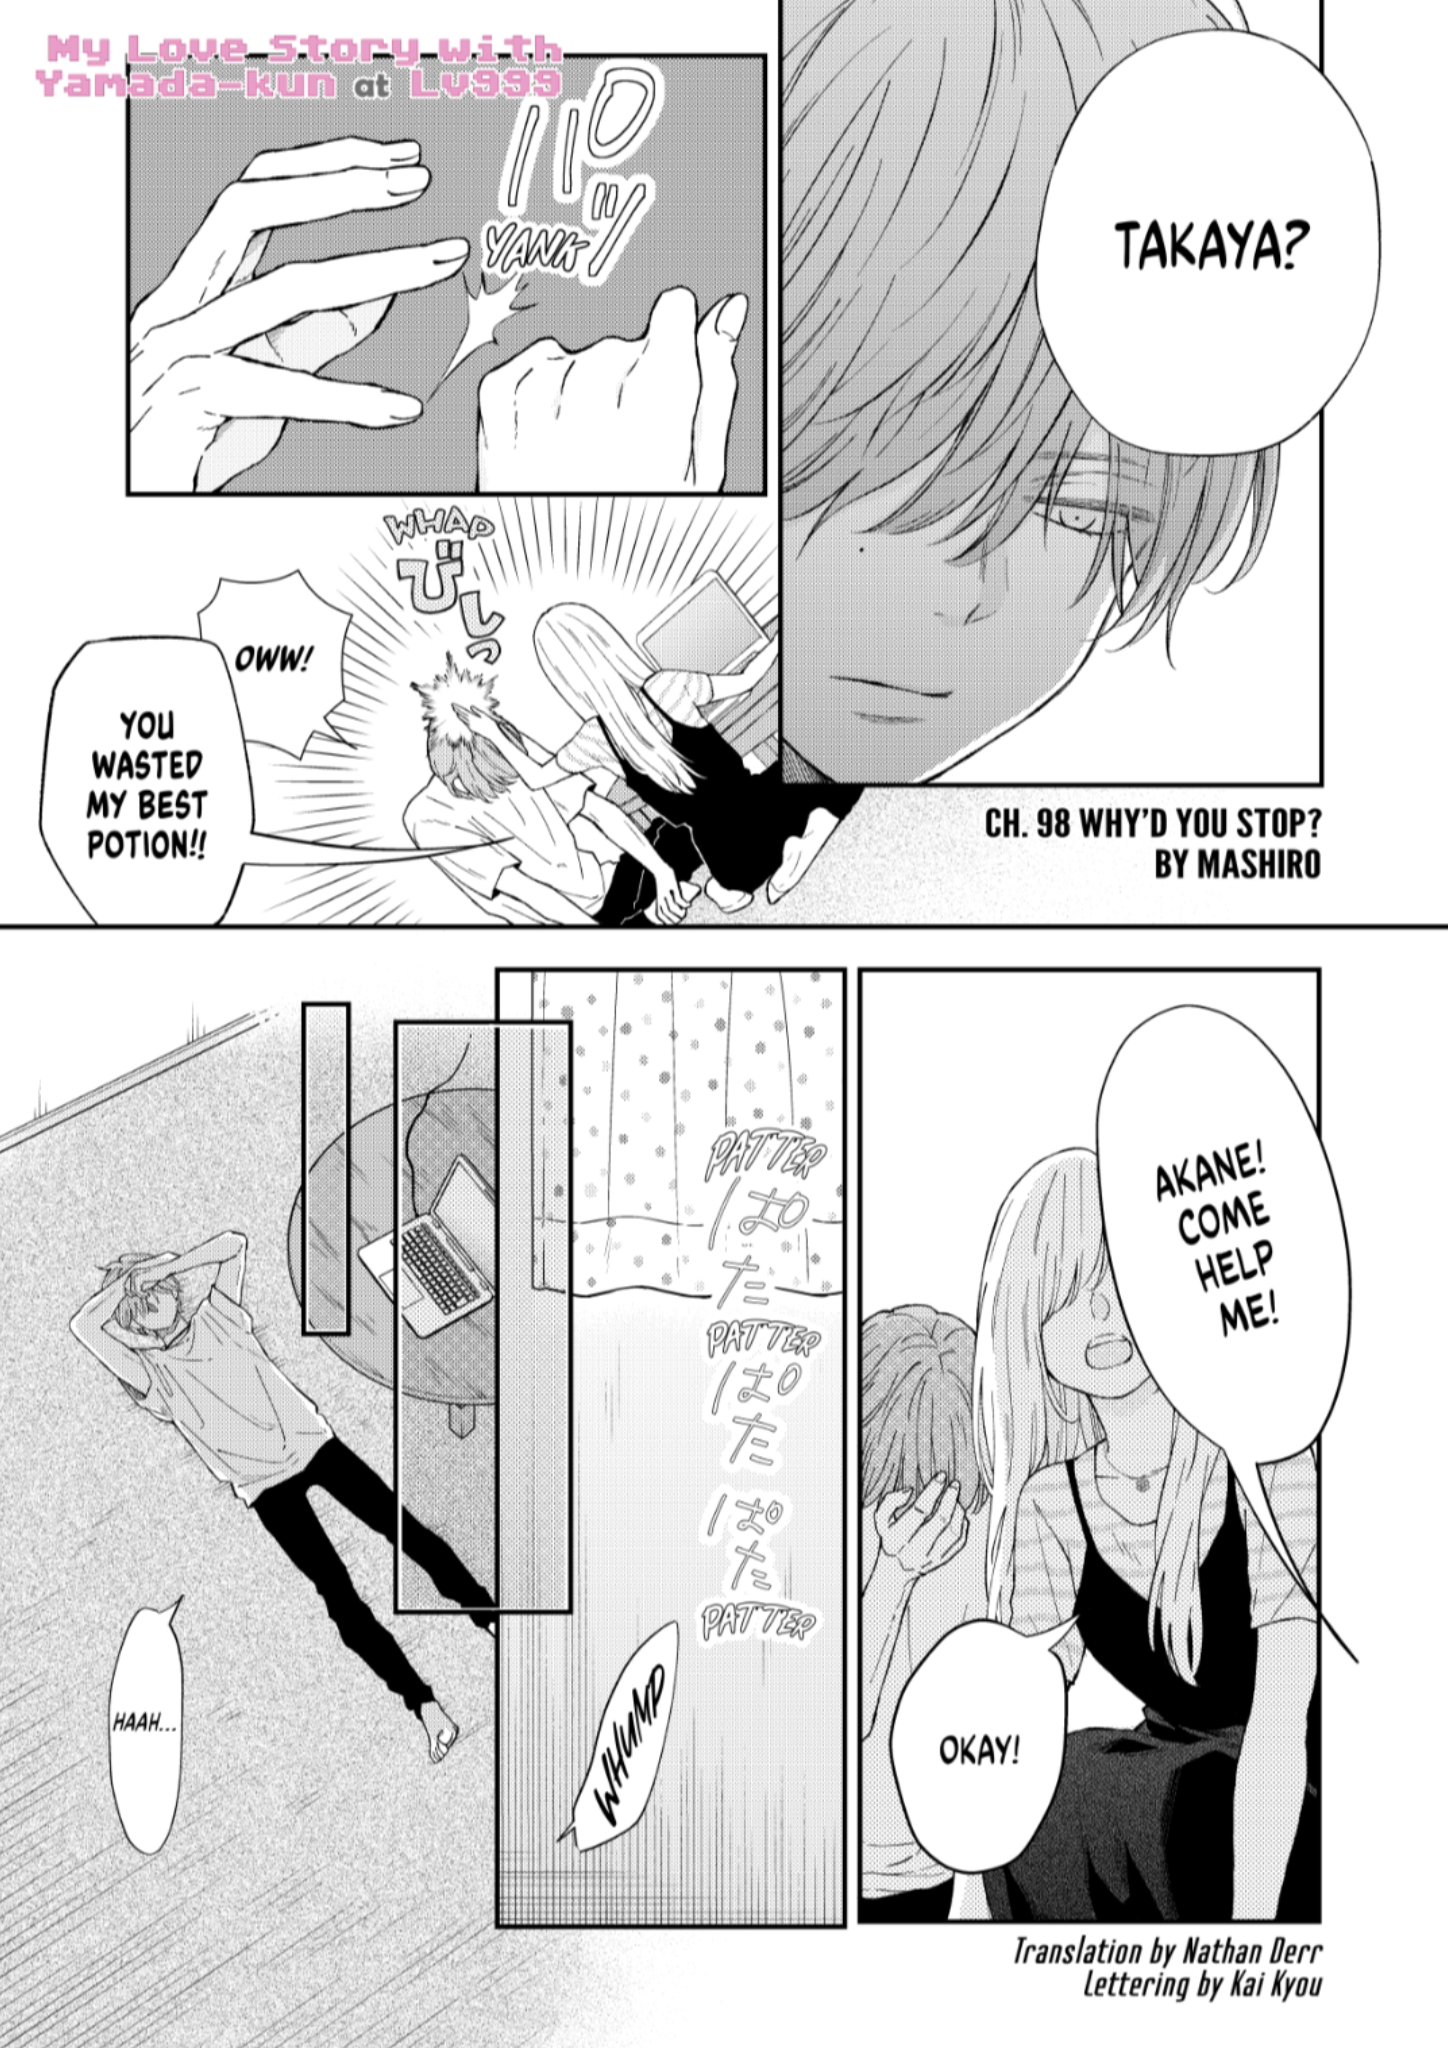 Chapter 91, My Love Story with Yamada-kun at Lv999